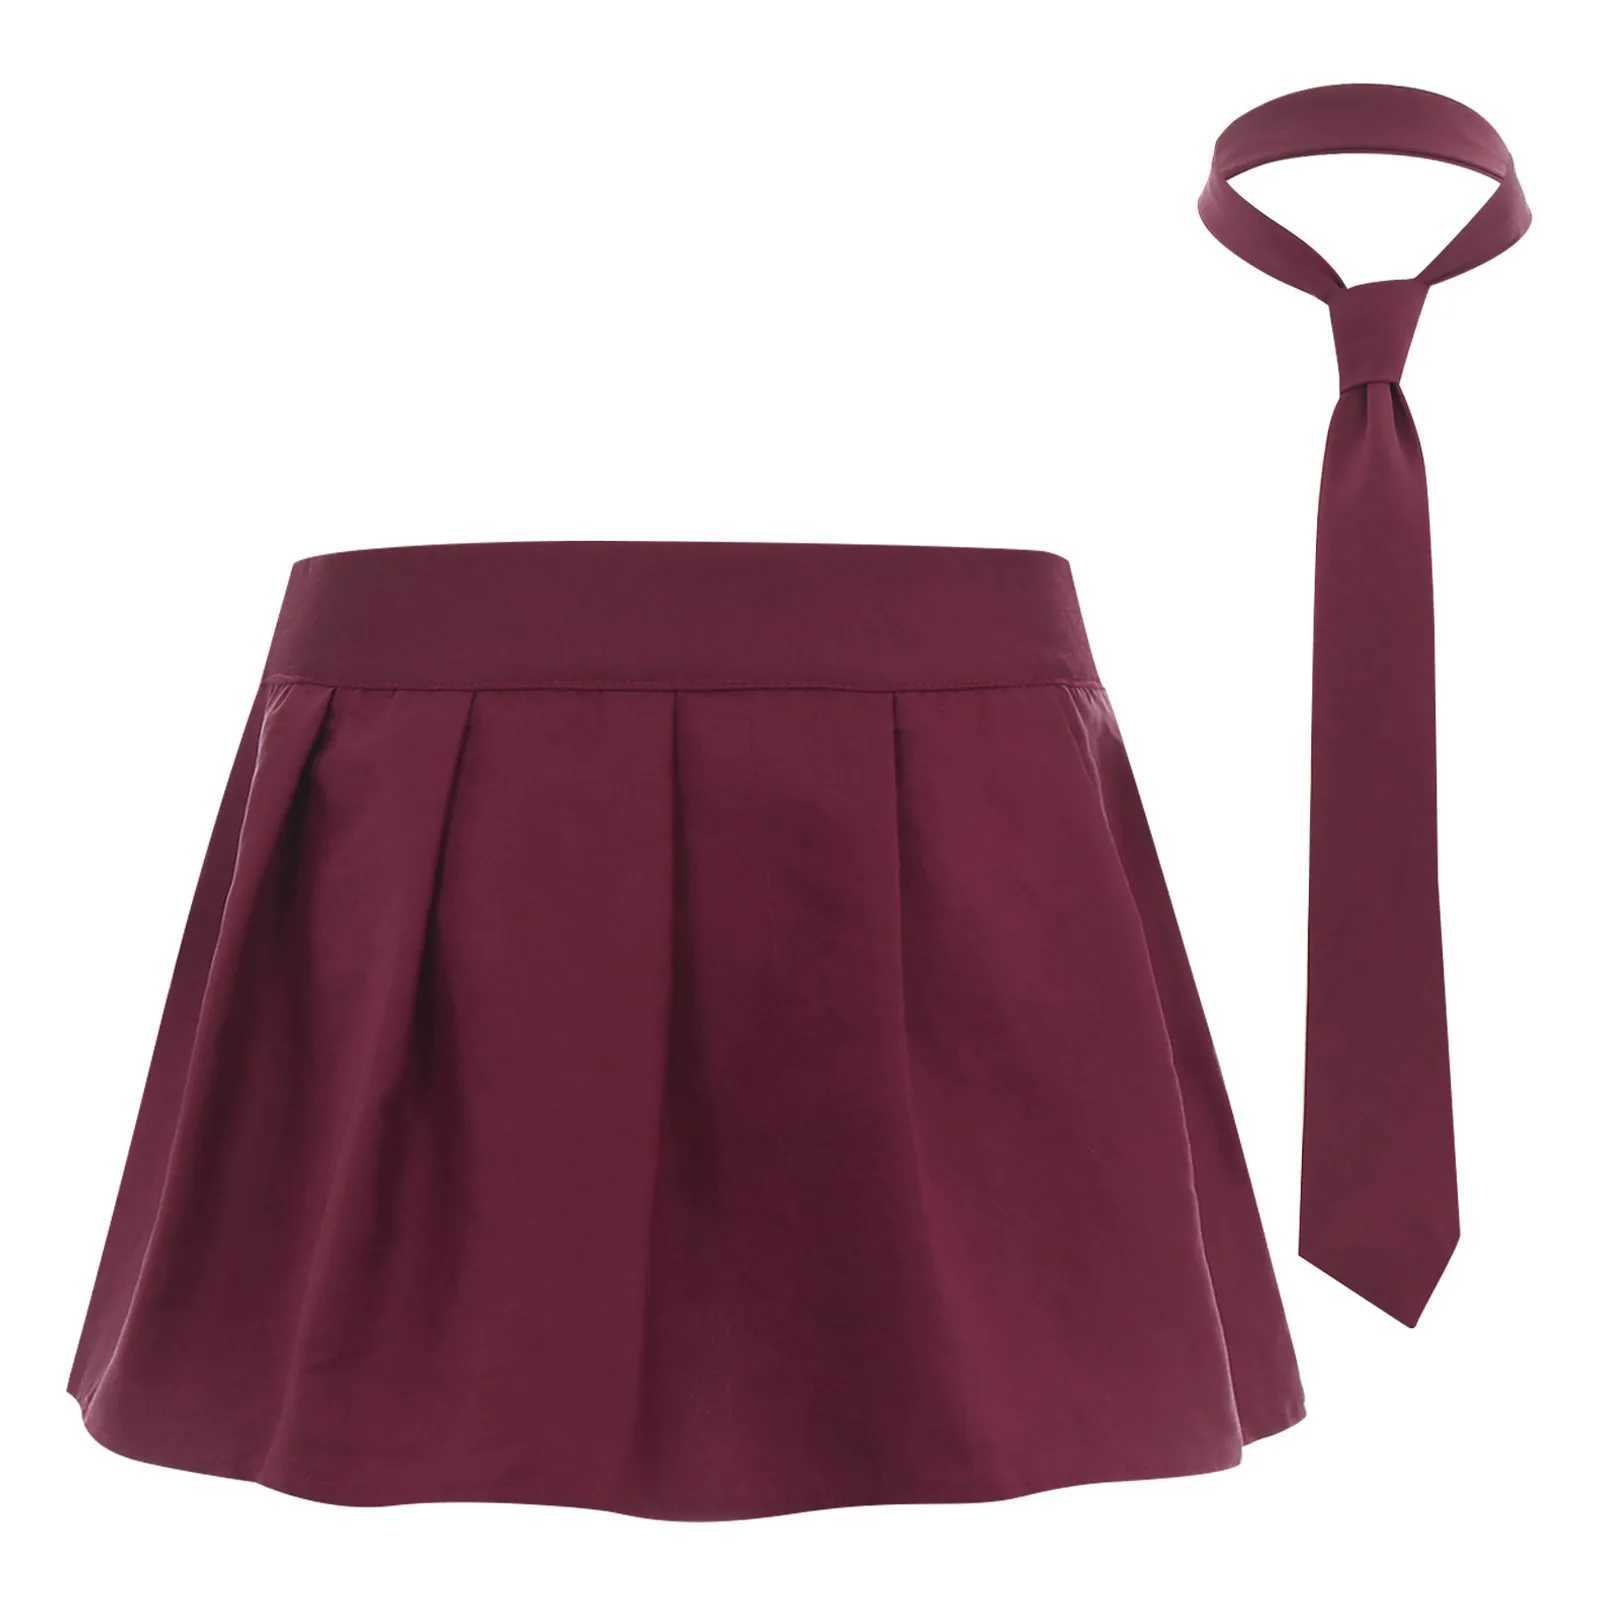 Skirts Female Japanese female student uniform skills role-playing come on fancy dress ball suit zipper plain mini skirt with collar Y240420